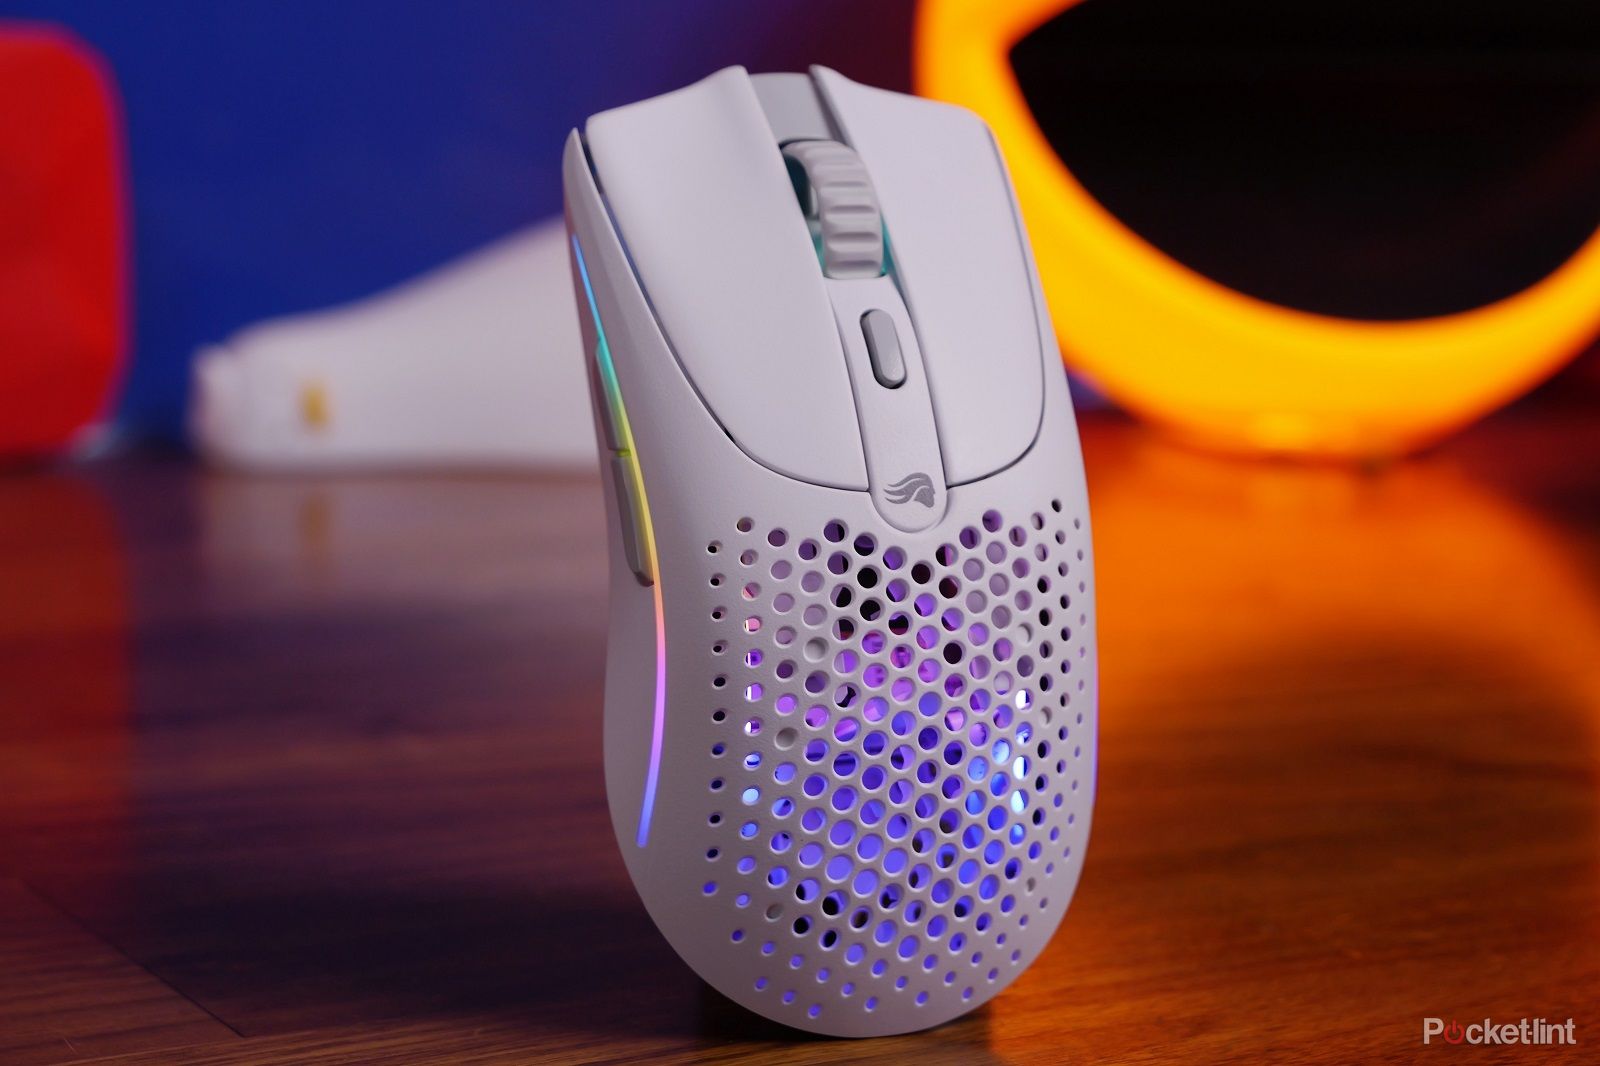 glorious-model-o2-wireless-gaming-mouse-review:-another-lightweight-gem